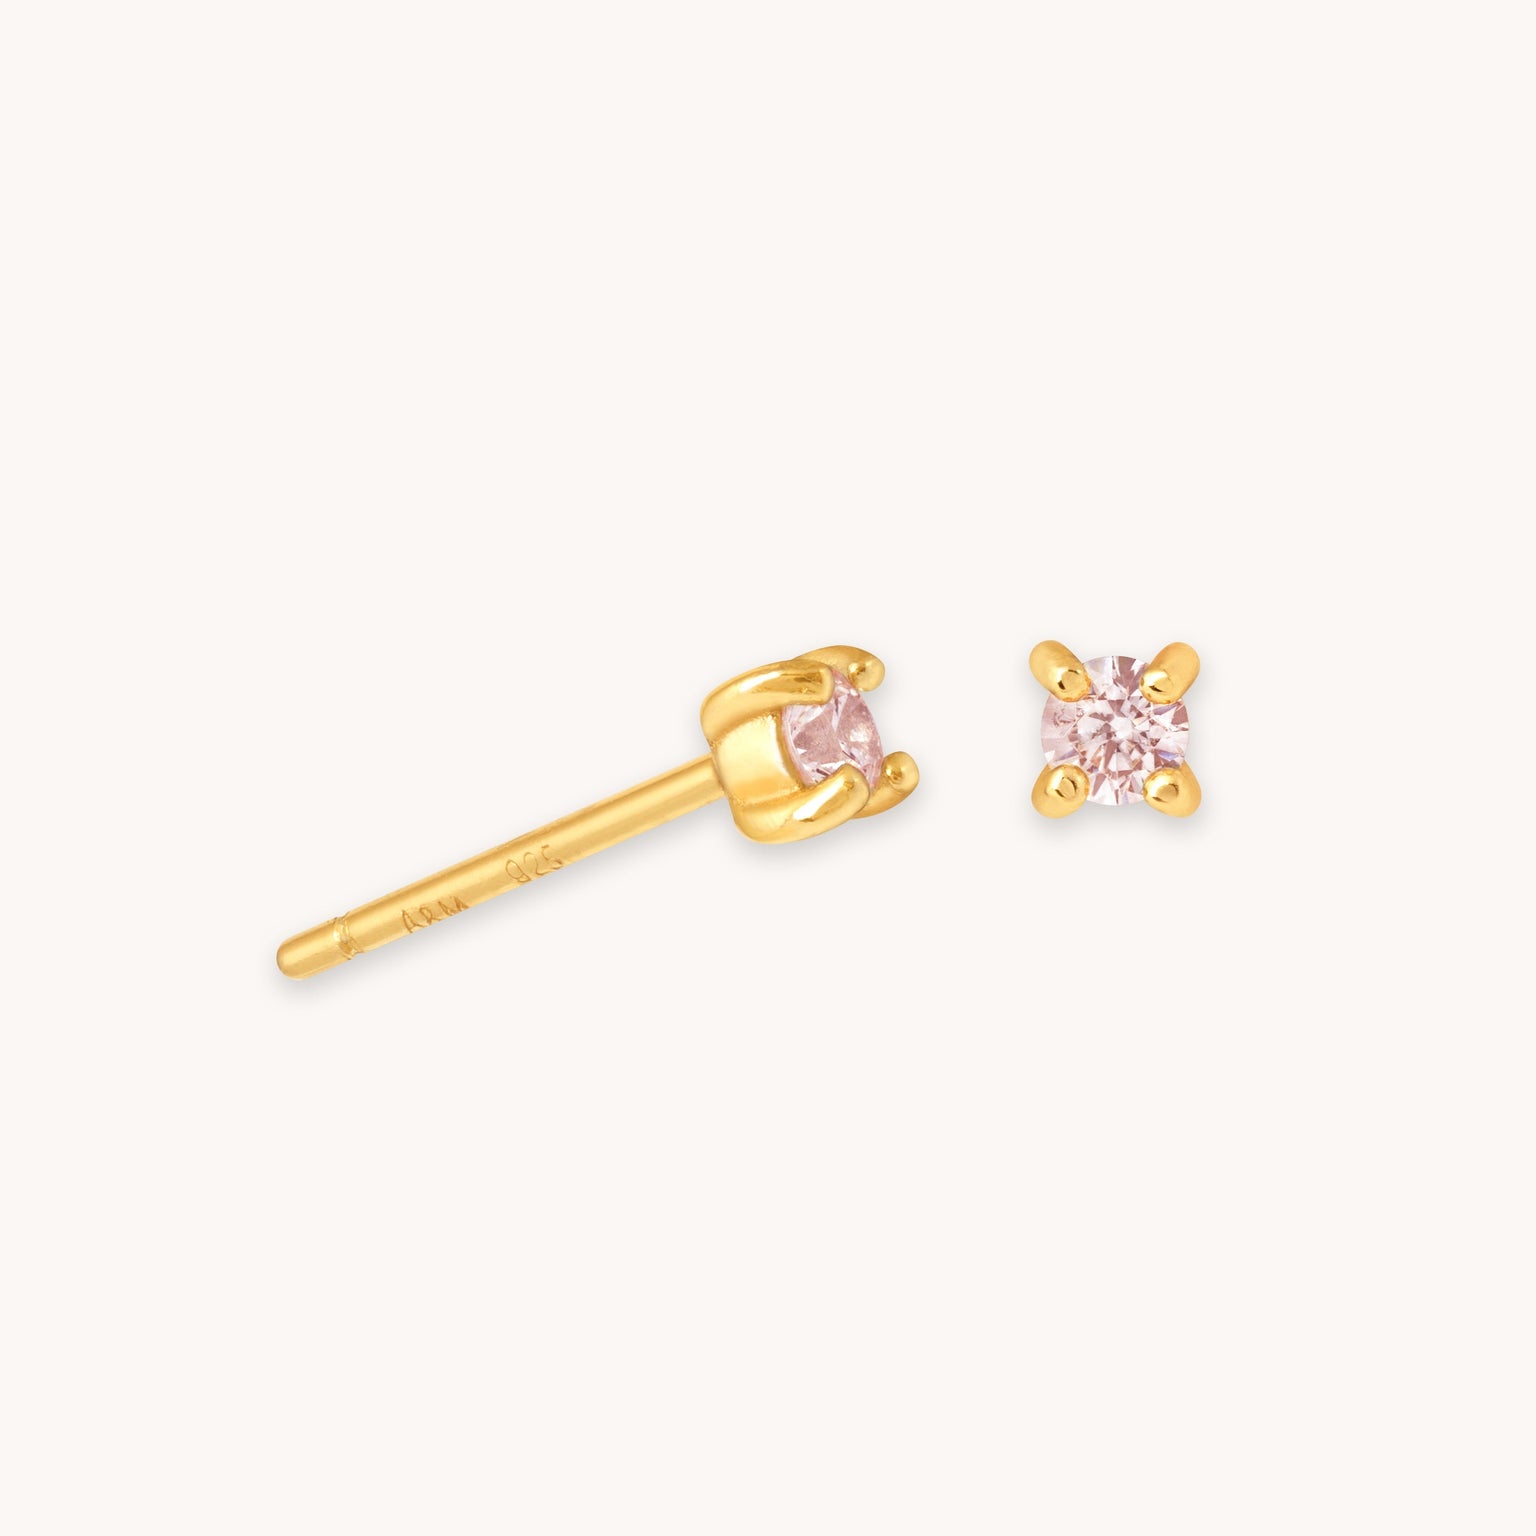 October Birthstone Stud Earrings in Gold with Pink Tourmaline CZ